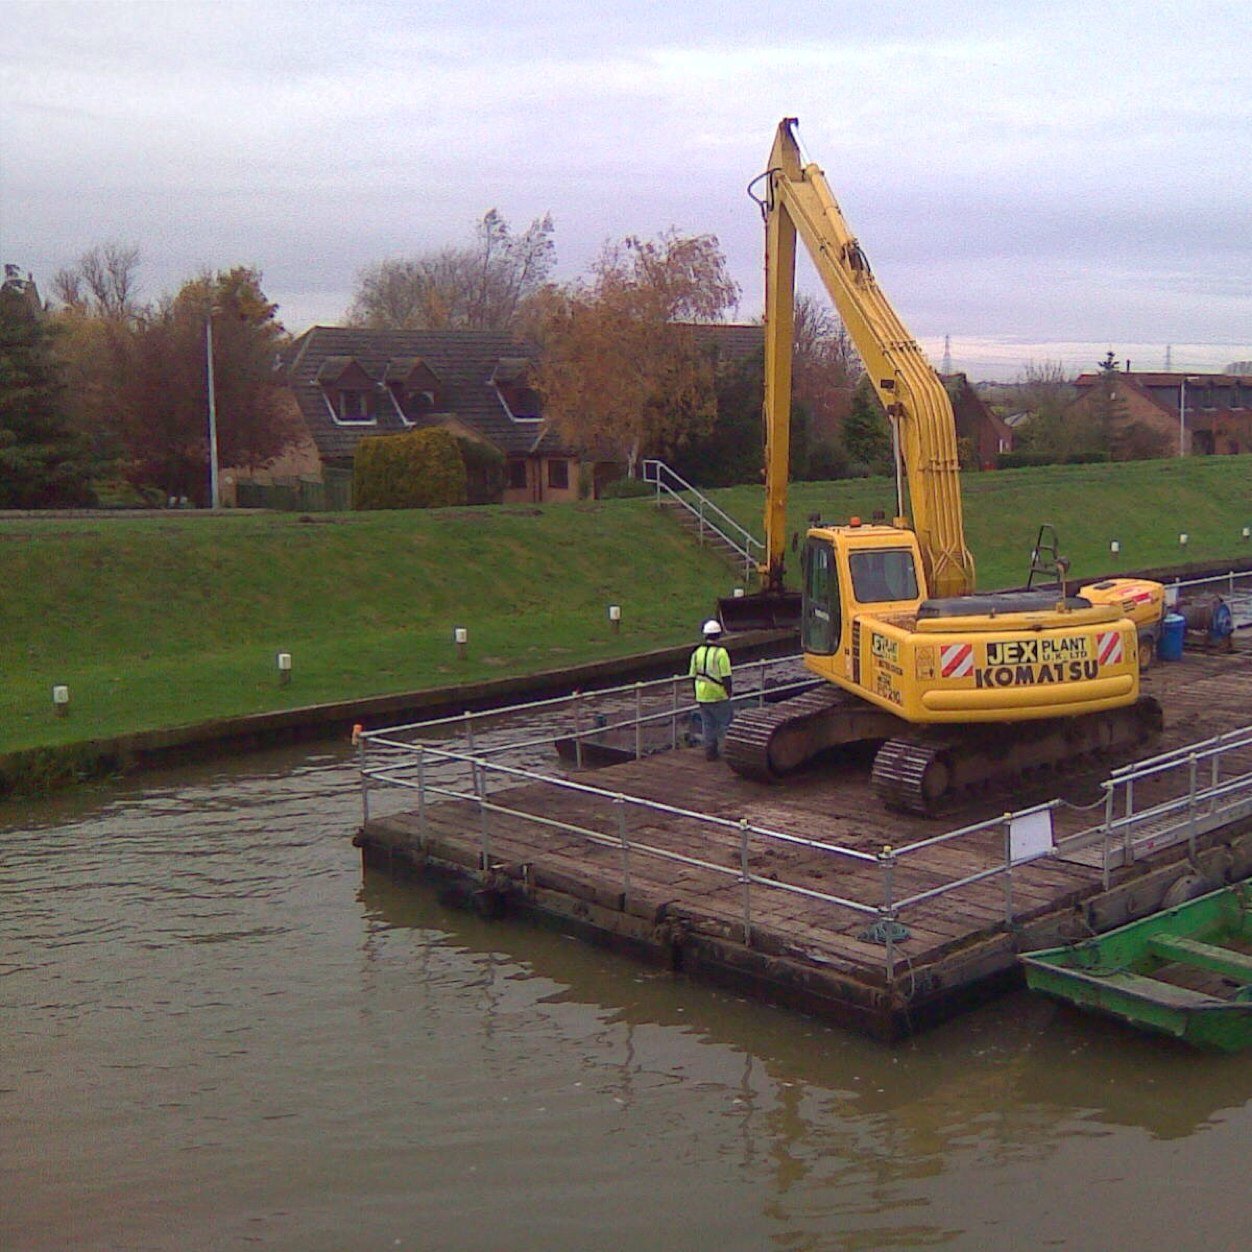 Will manage all rivers and waterways in england, scotland and wales,